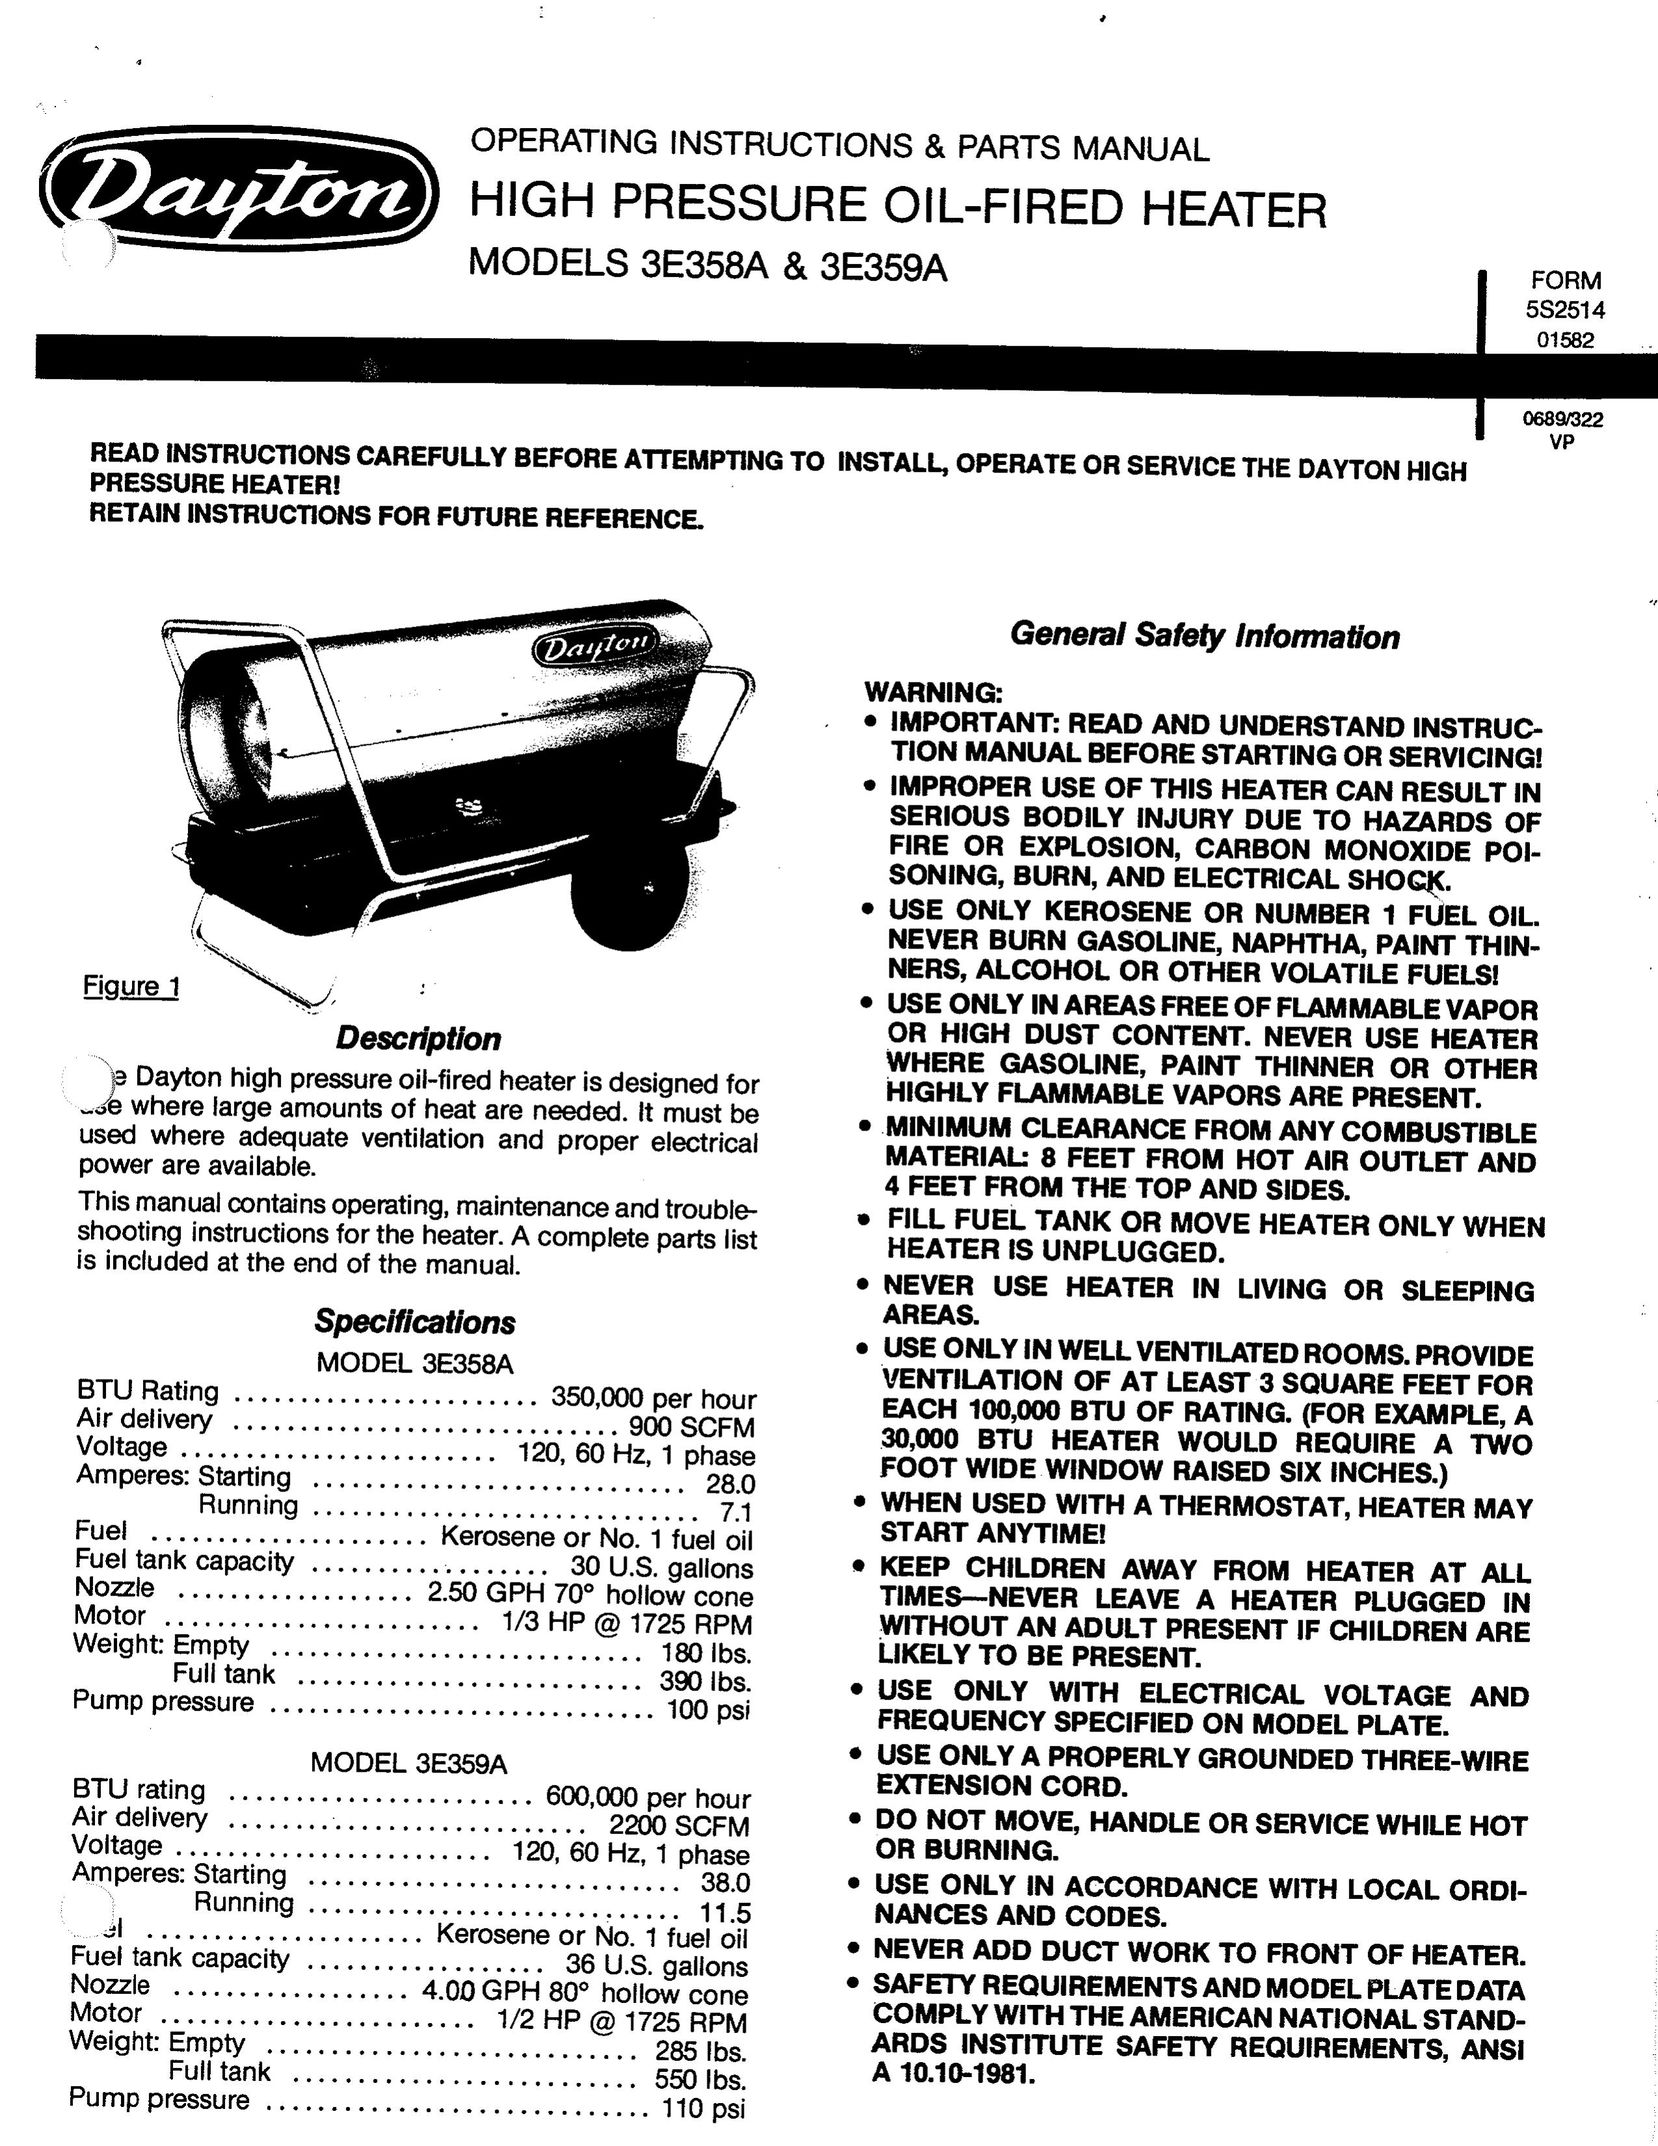 Dayton 3E358A Electric Heater User Manual (Page 1)